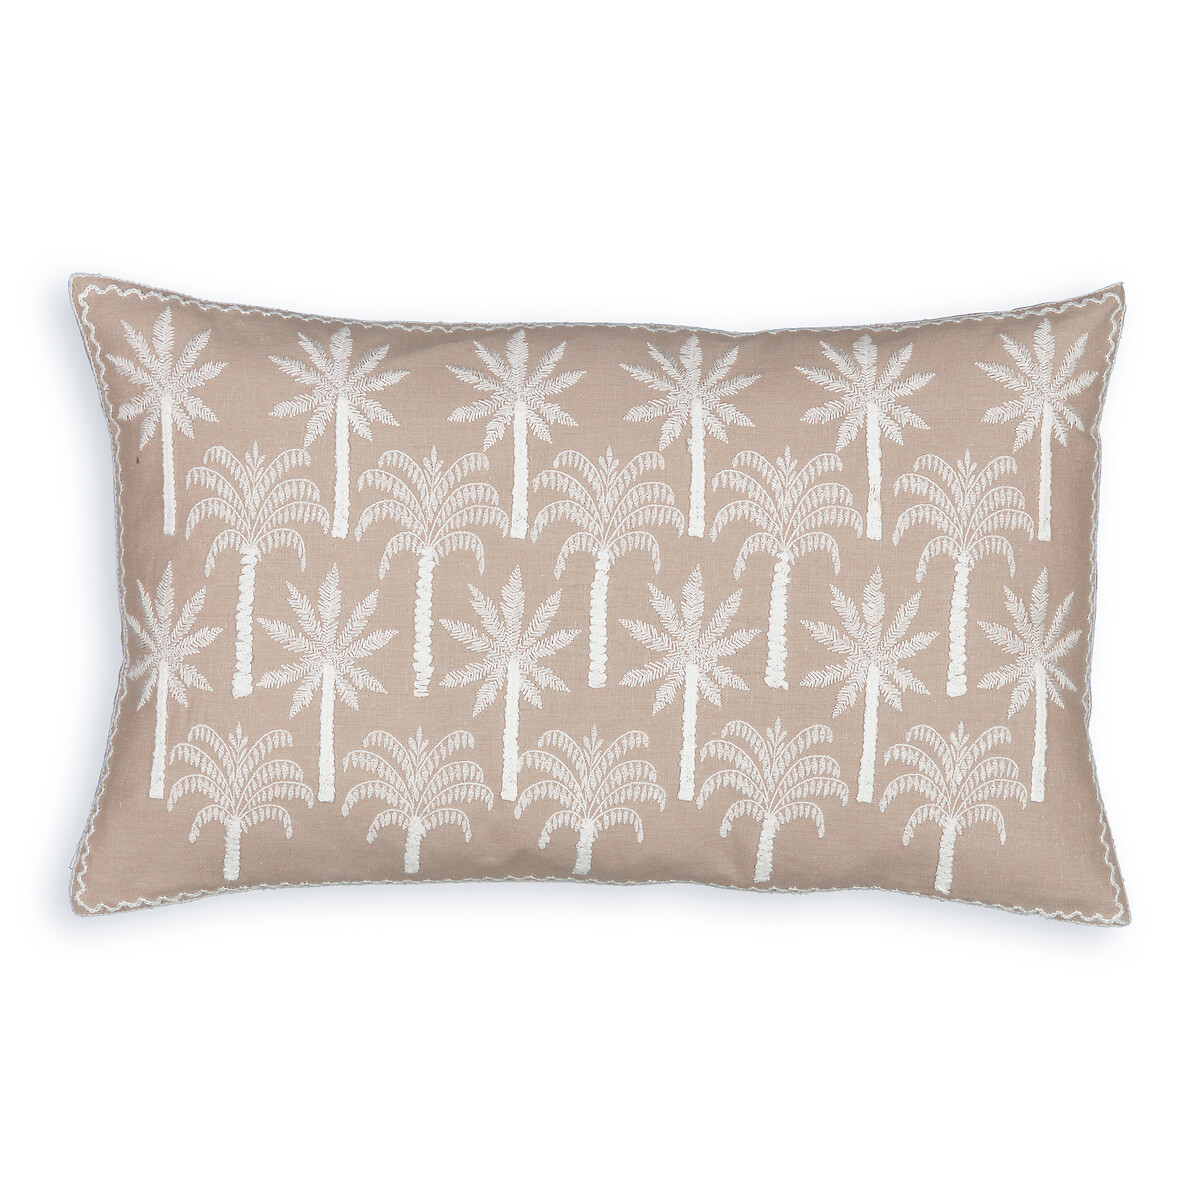 Siwa Rectangular Embroidered Linen & Cotton Cushion Cover